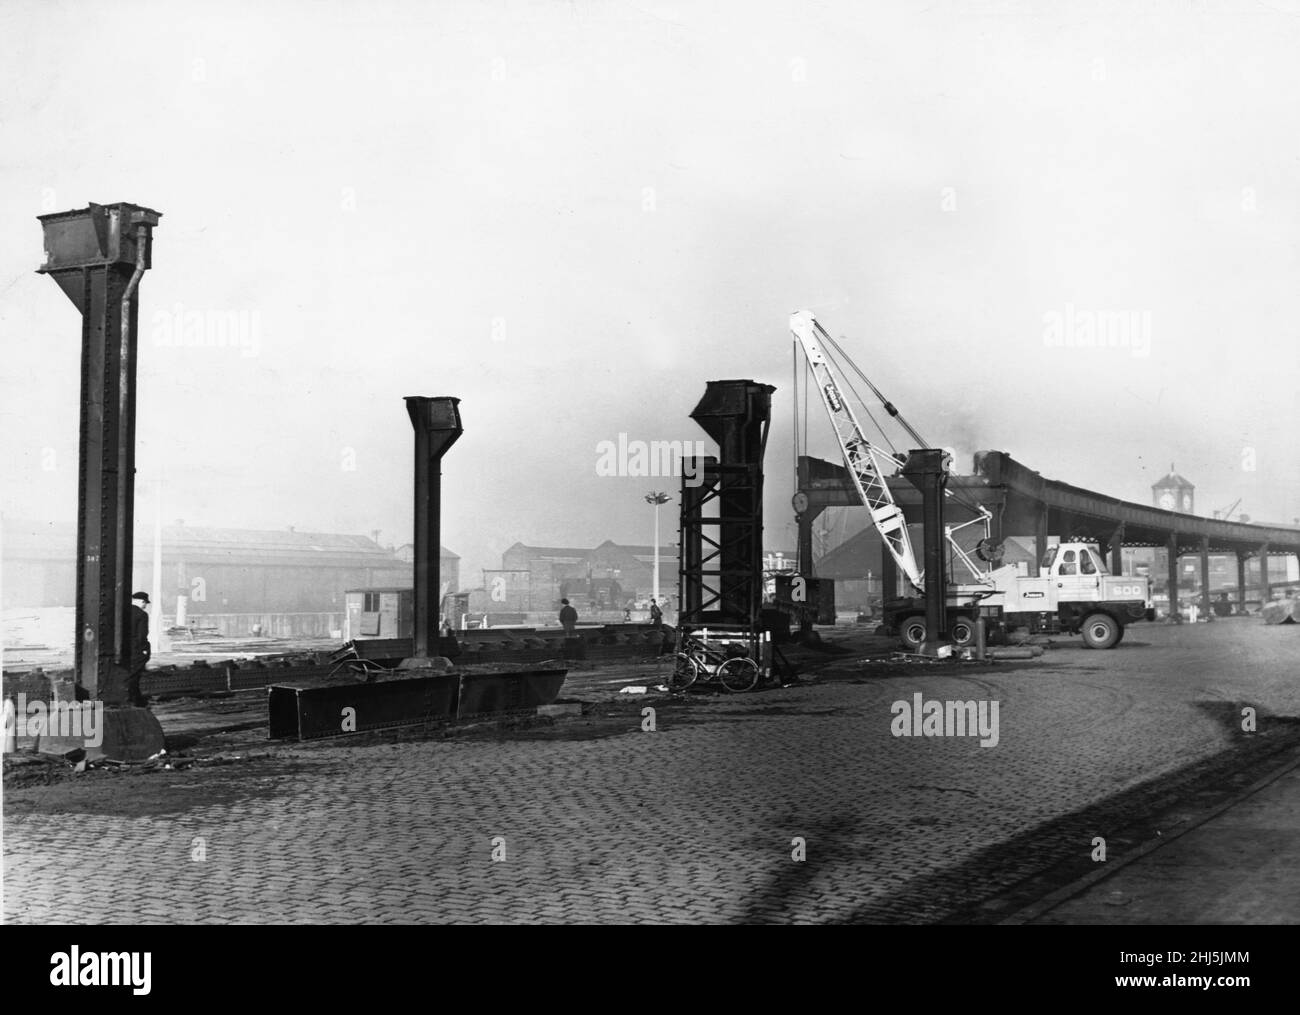 The dismantling of the Liverpool Overhead Railway. The railway stretched from as far as Dingle in the south to Seaforth & Litherland.Demolition in the North. Demolition of the structure commenced on 23 September 1957, and all 80 acres of elevated track were removed by January the following year. This picture was taken at Herculaneum Dock where 250 feet sections of the upper steel structure have been removed. Picture dated: 26th September 1957. Stock Photo